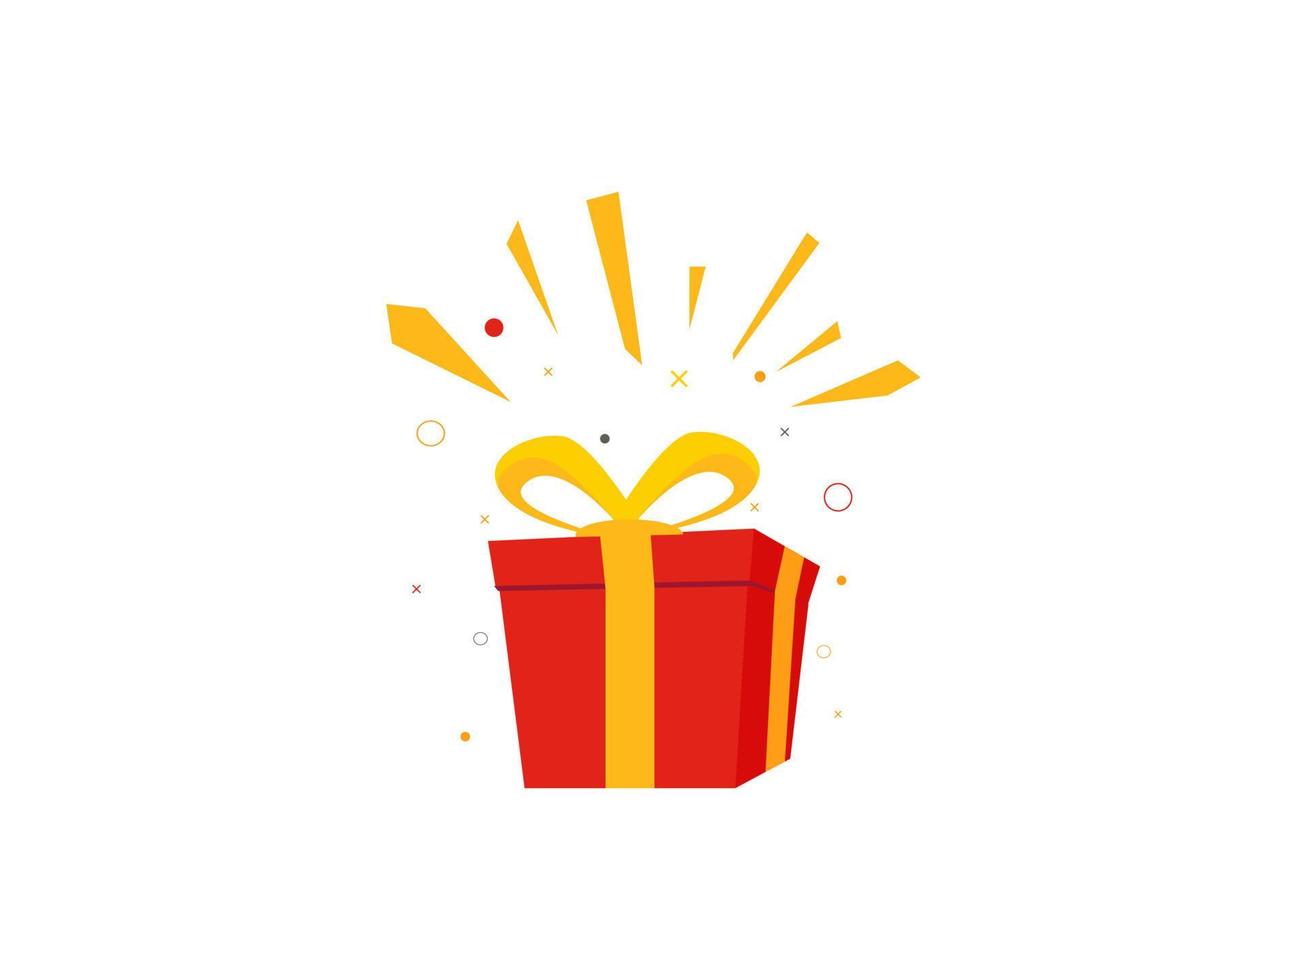 surprise red gift box, birthday celebration, special give away package, loyalty program reward, vector icon illustration